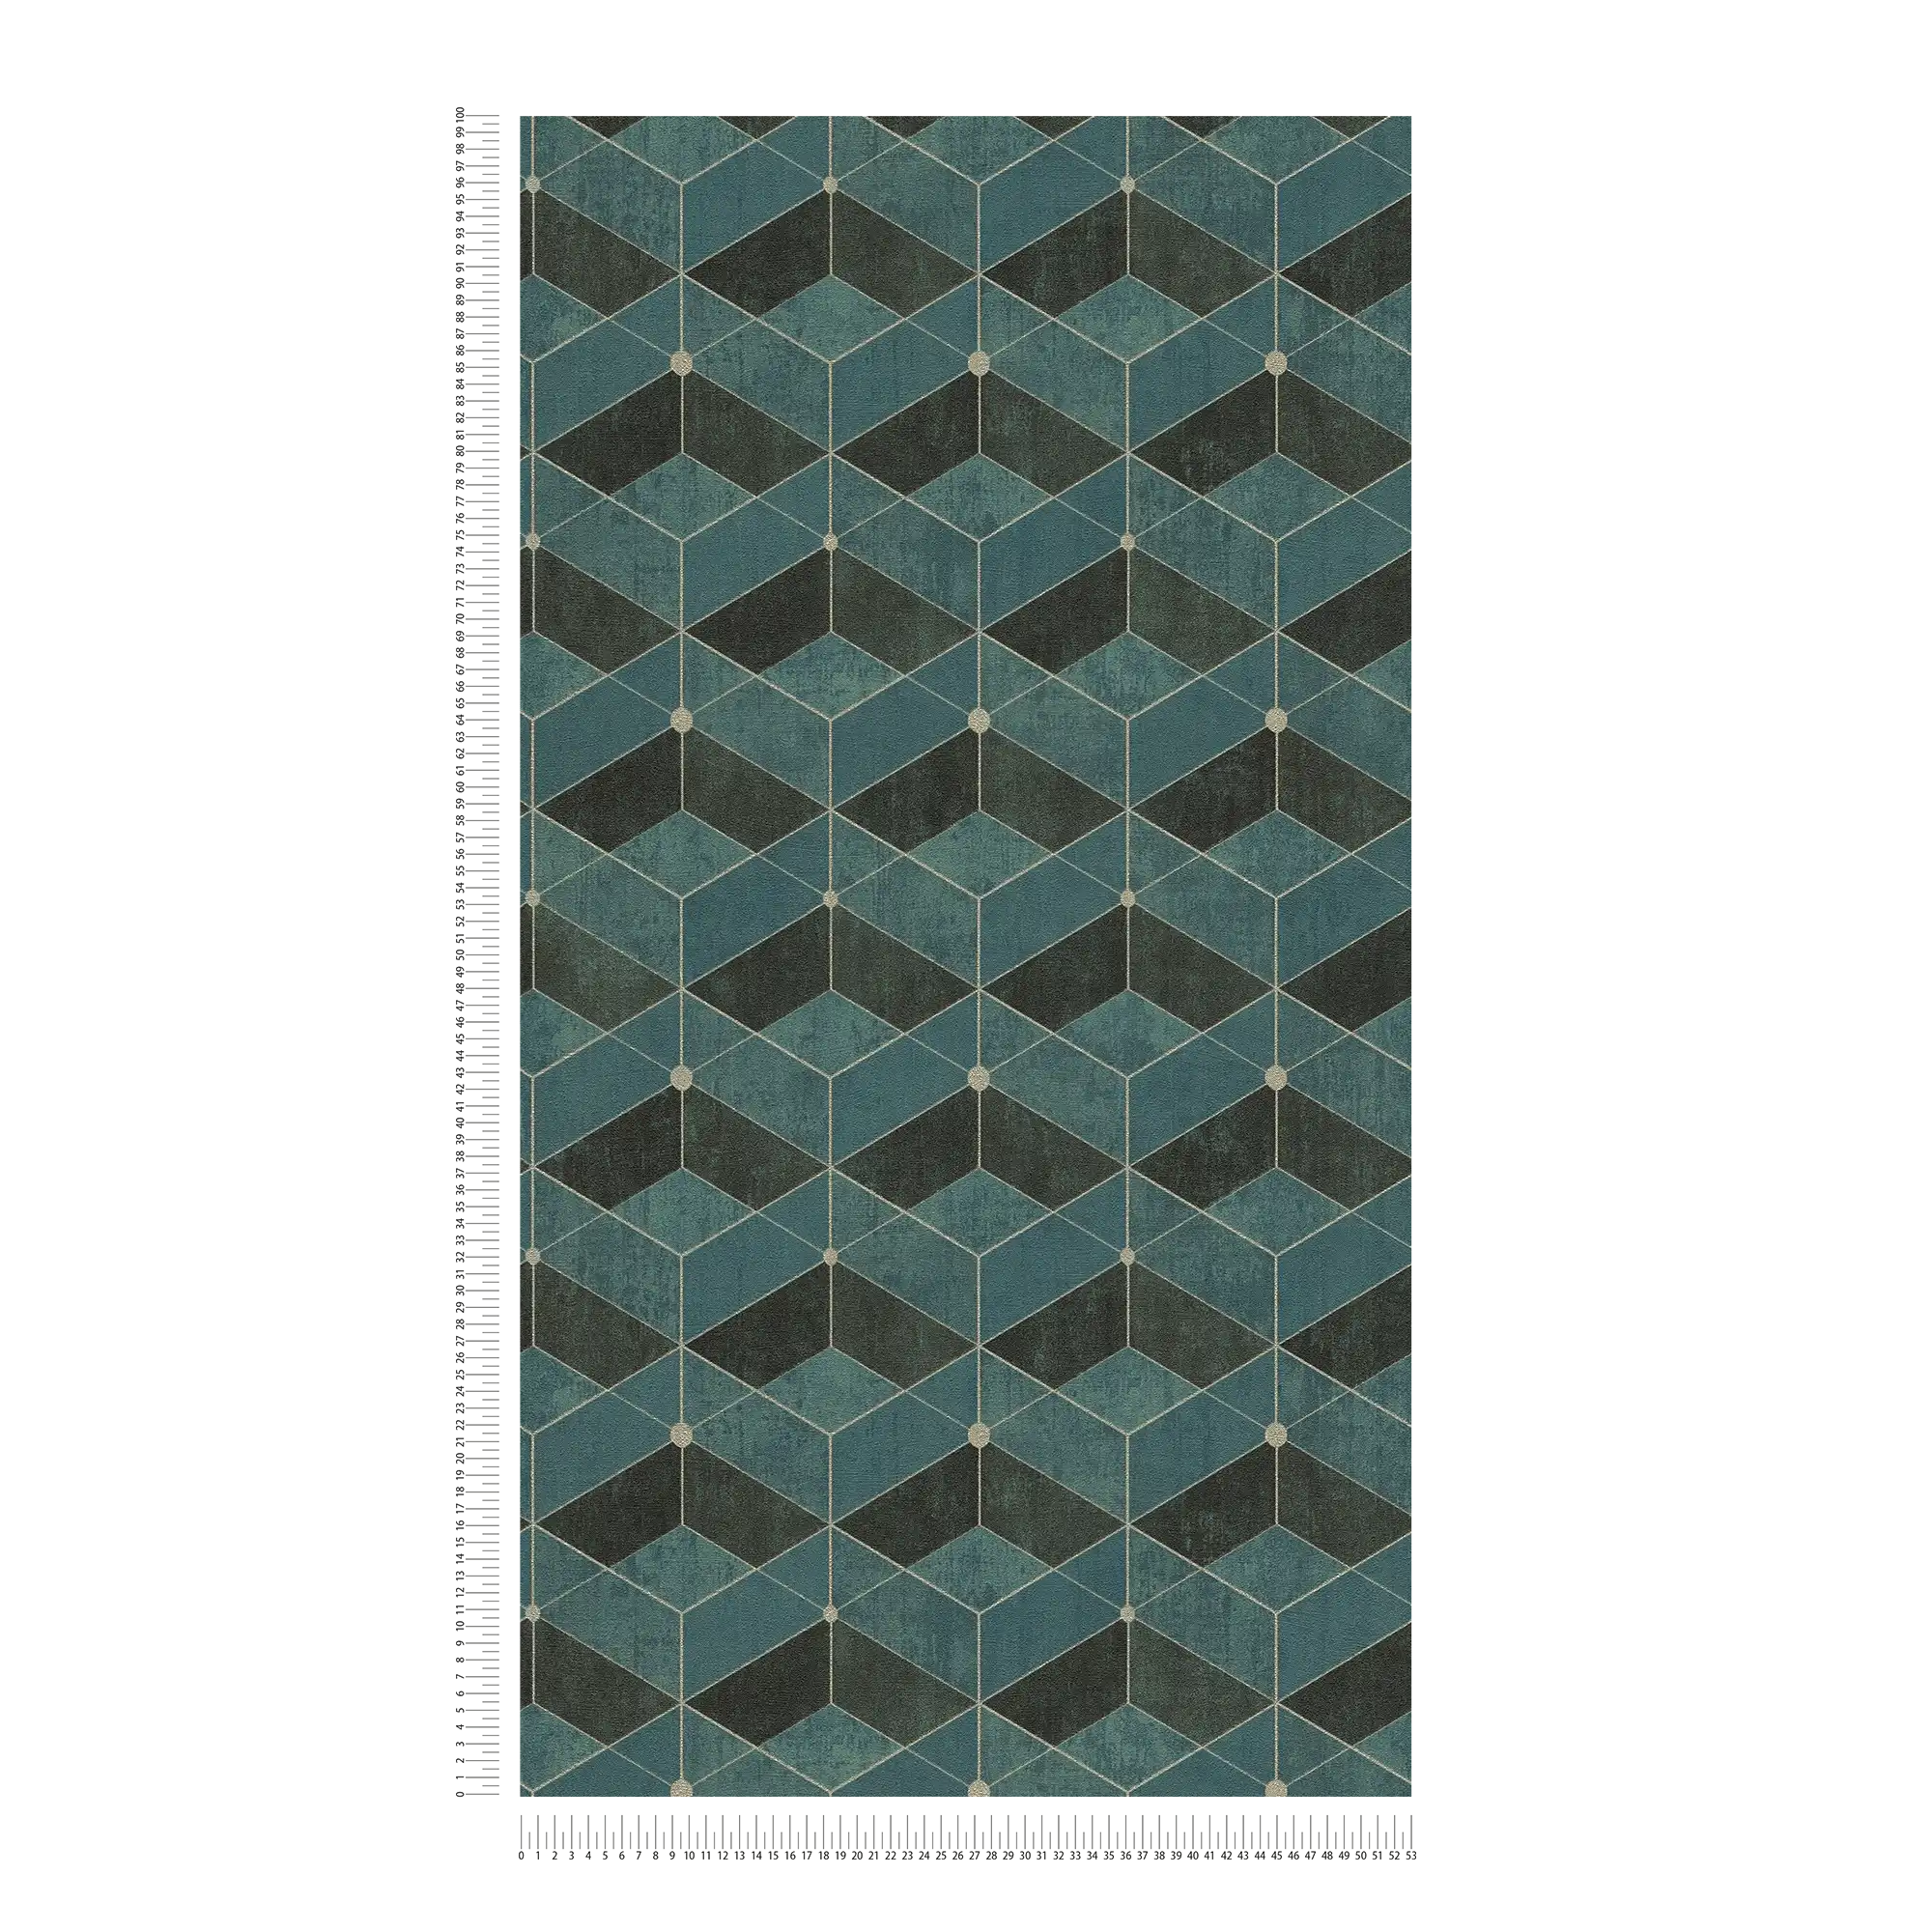             Petrol wallpaper with graphic pattern & metallic accent - blue, green, black
        